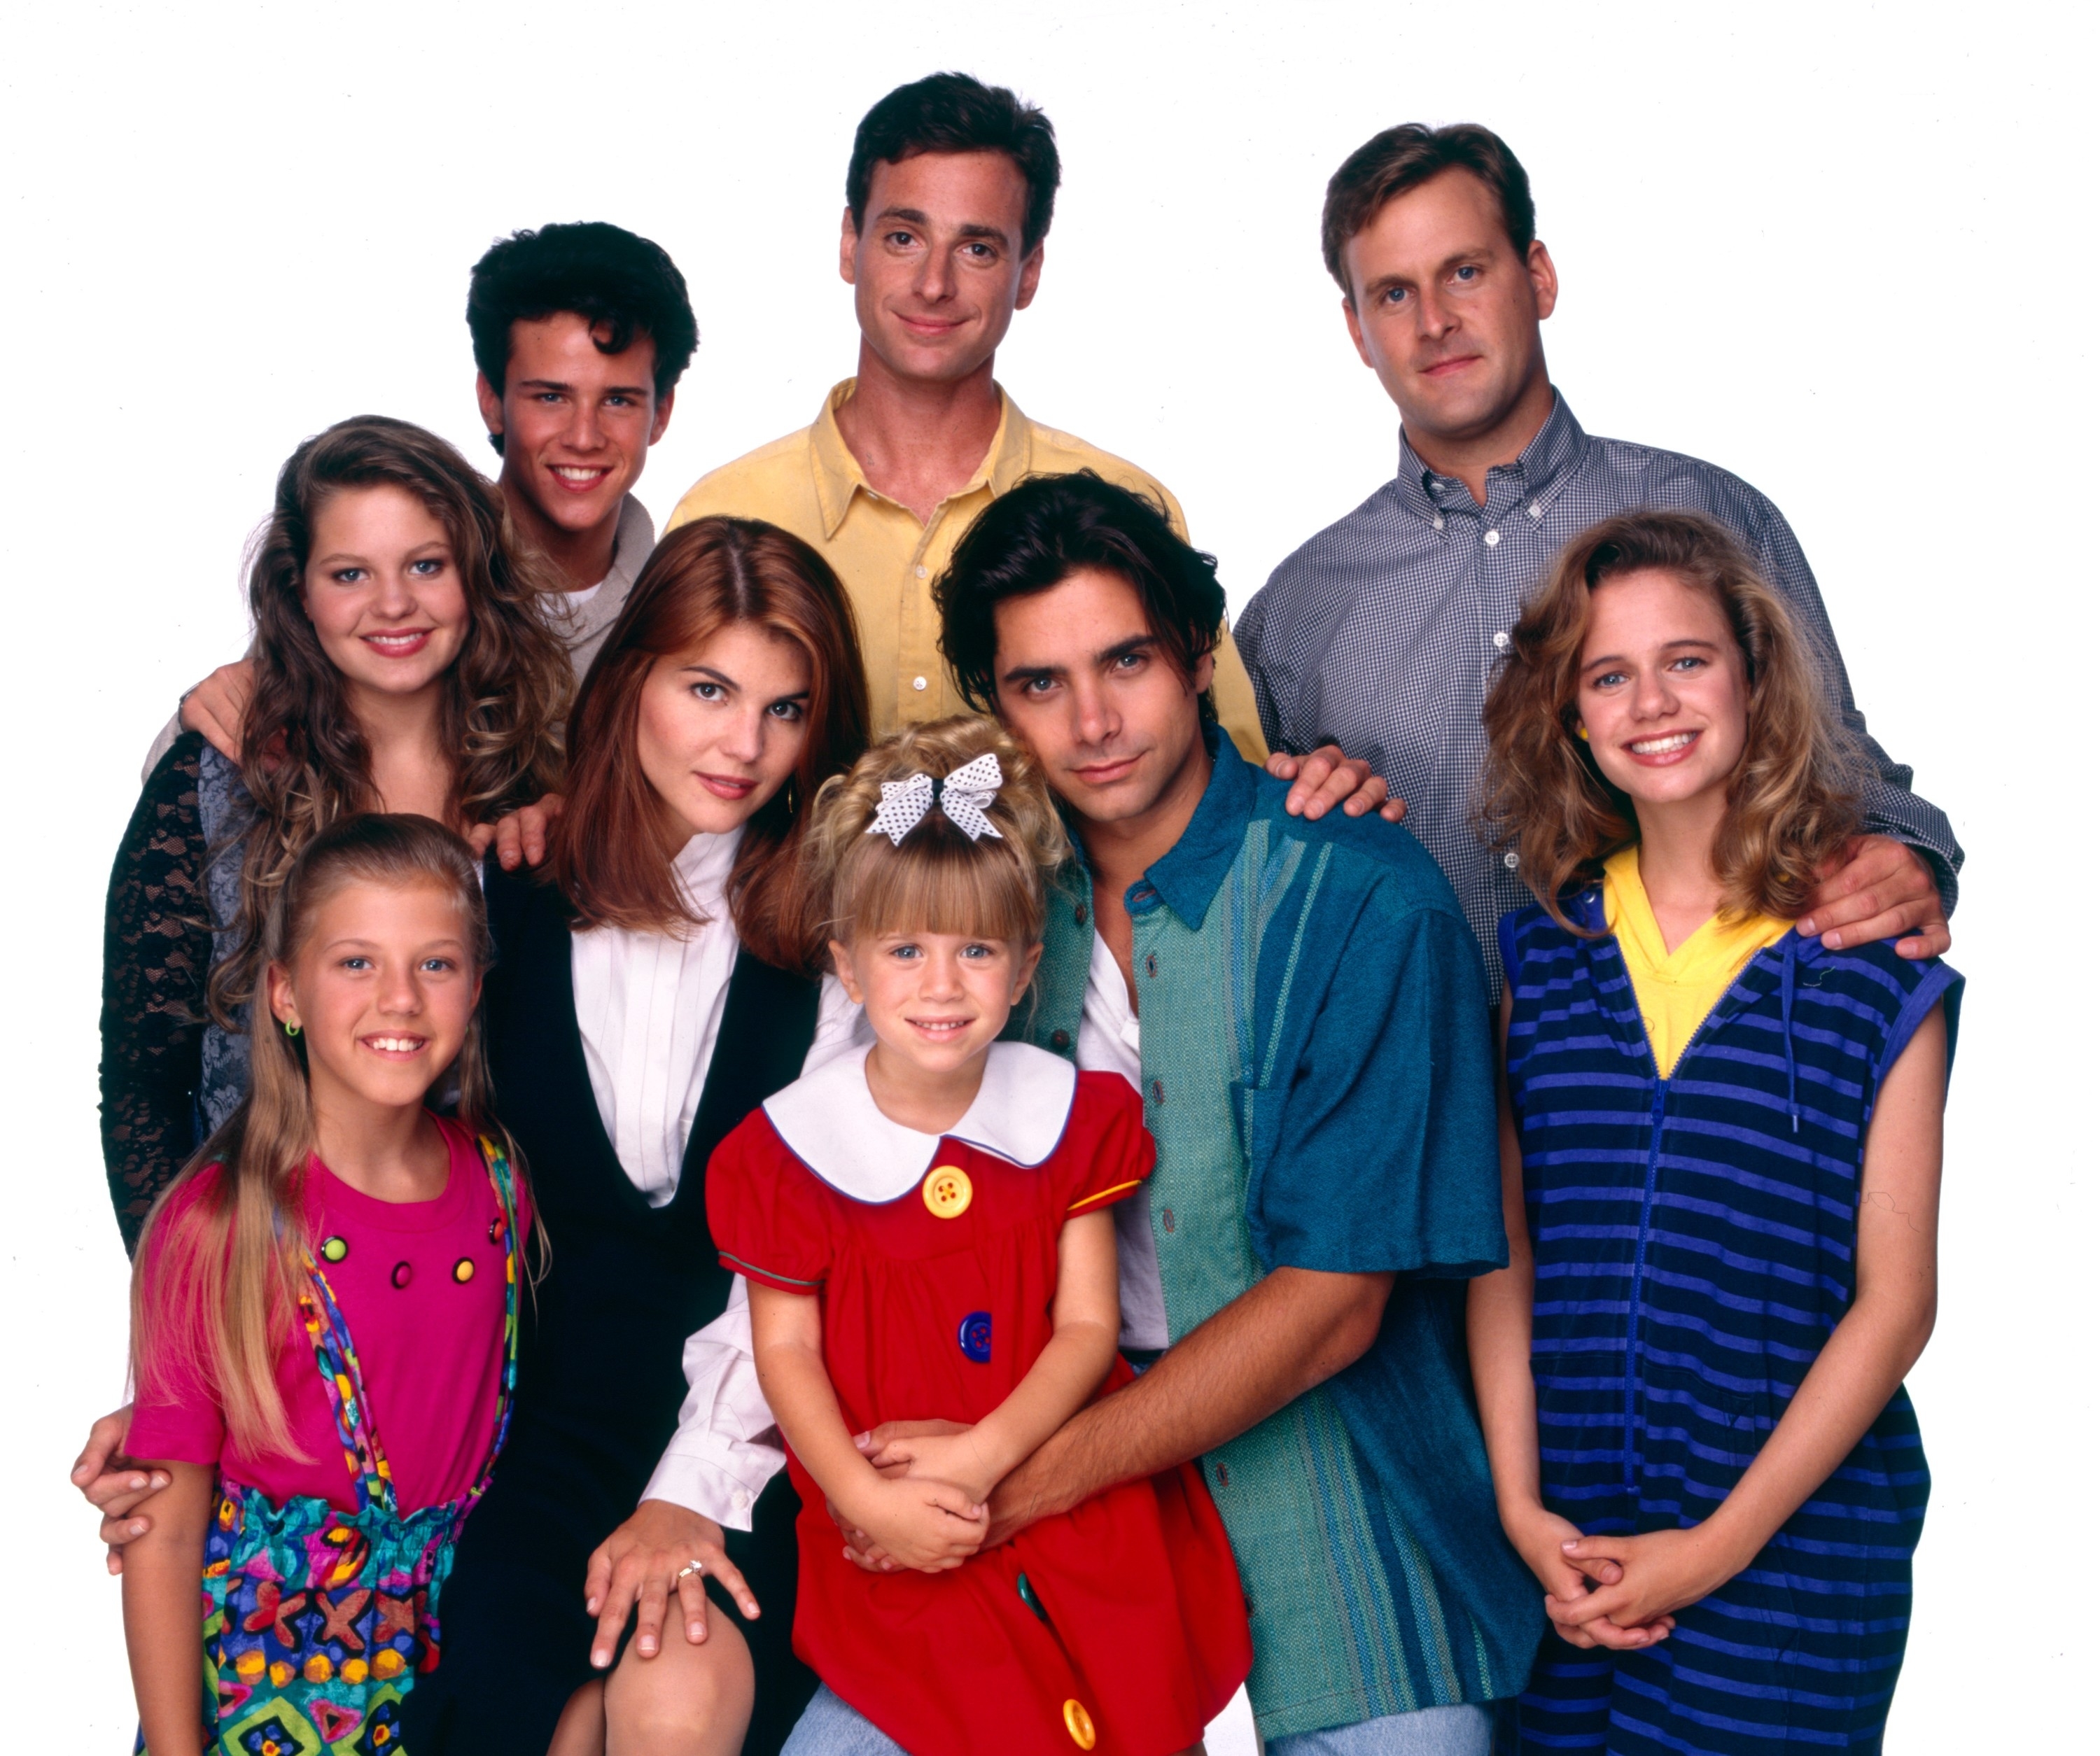 Group photo of &quot;Full House&quot; TV show cast posing together